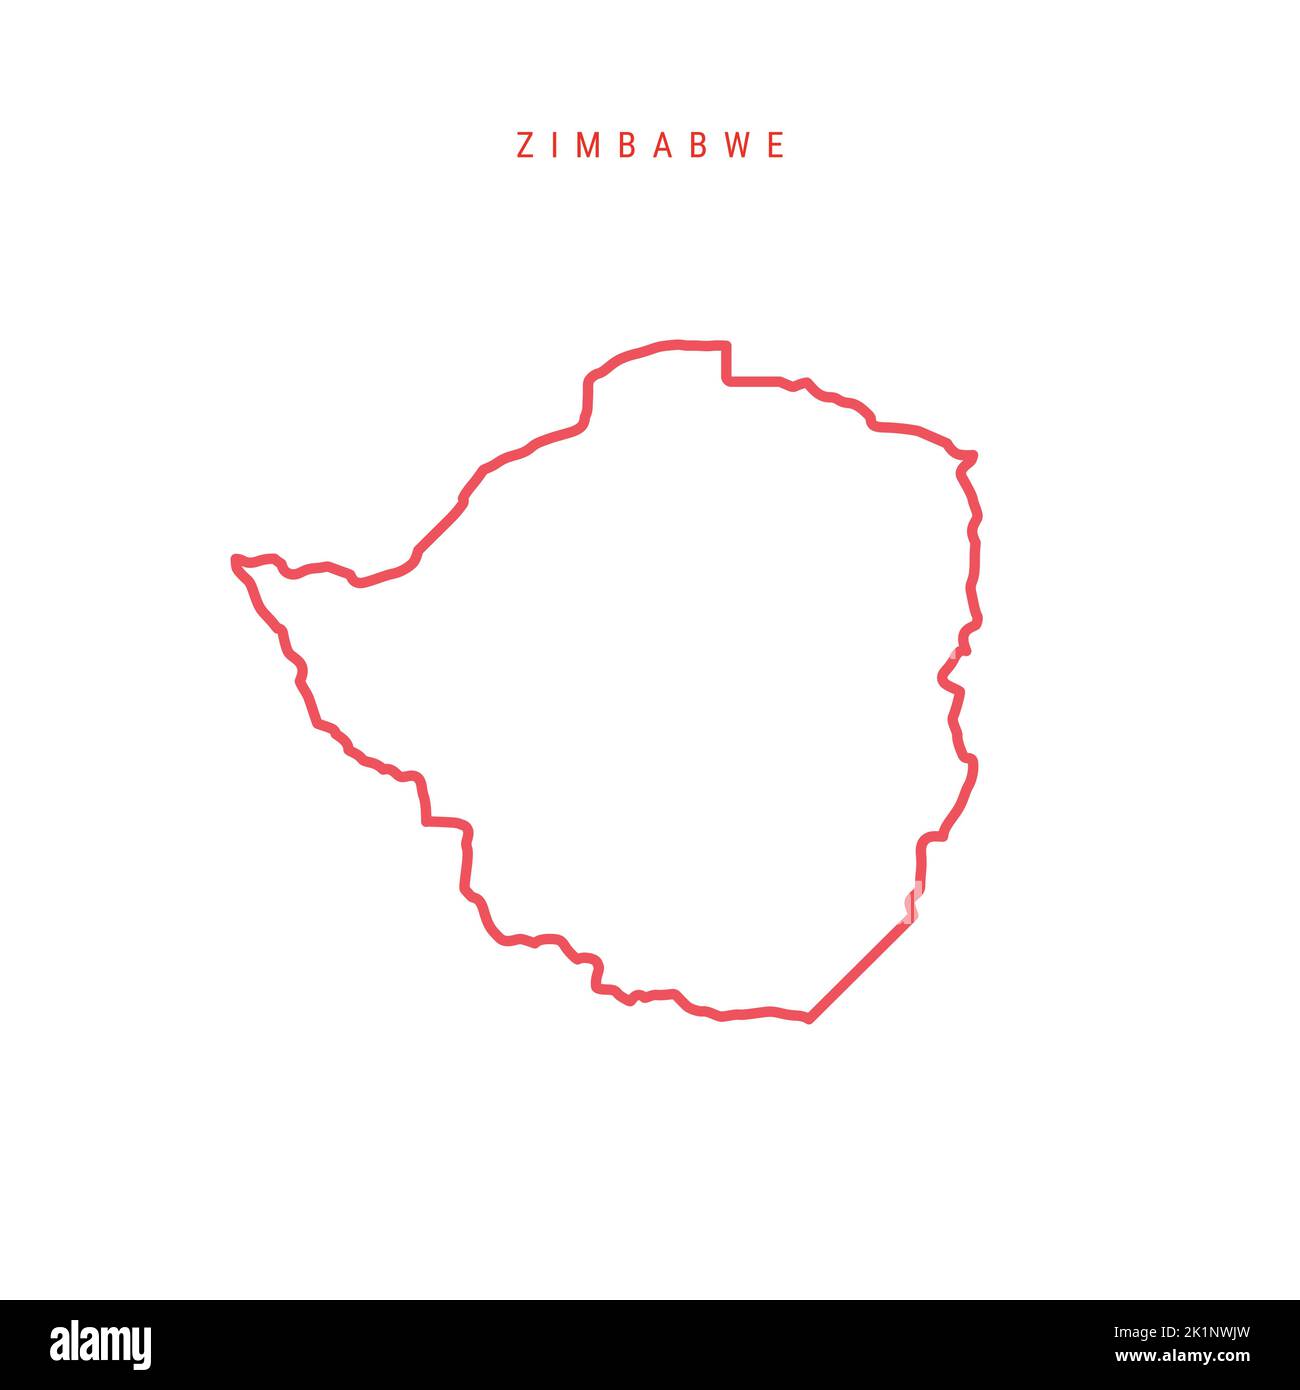 Zimbabwe editable outline map. Zimbabwean red border. Country name. Adjust line weight. Change to any color. Vector illustration. Stock Vector